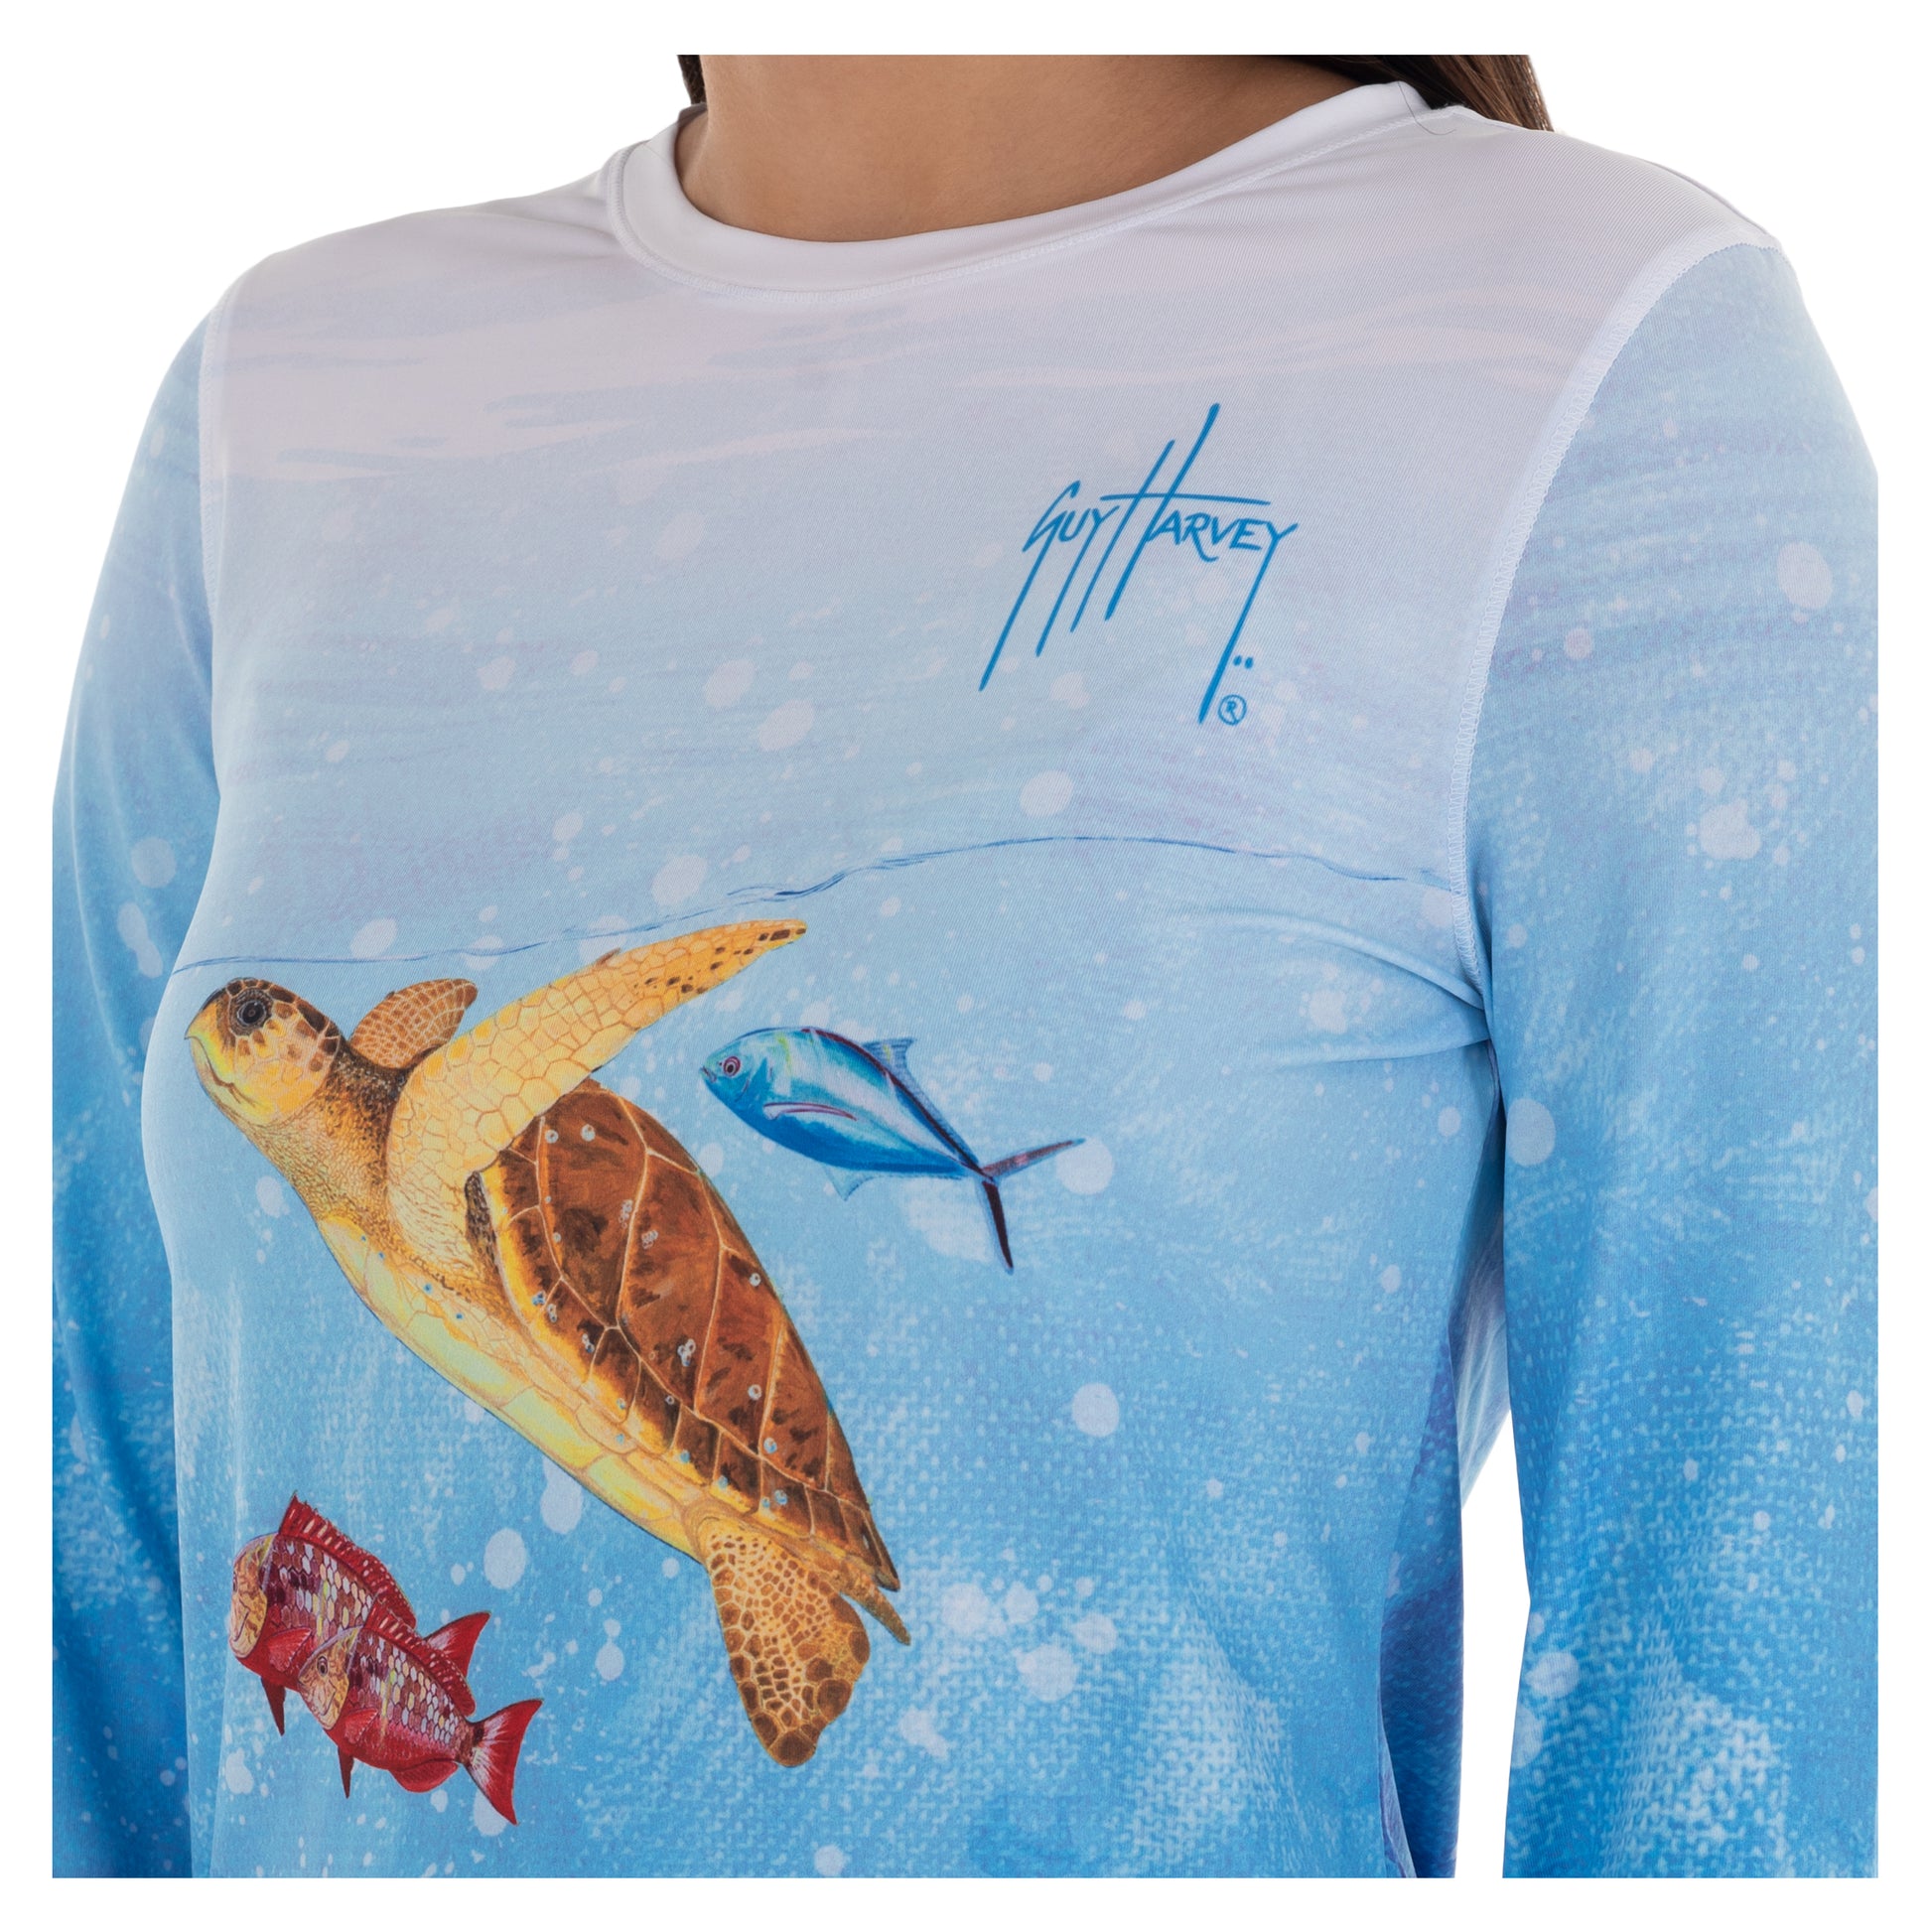 MANG Planting Hope Turtle Women's LS - XL / Seagrass